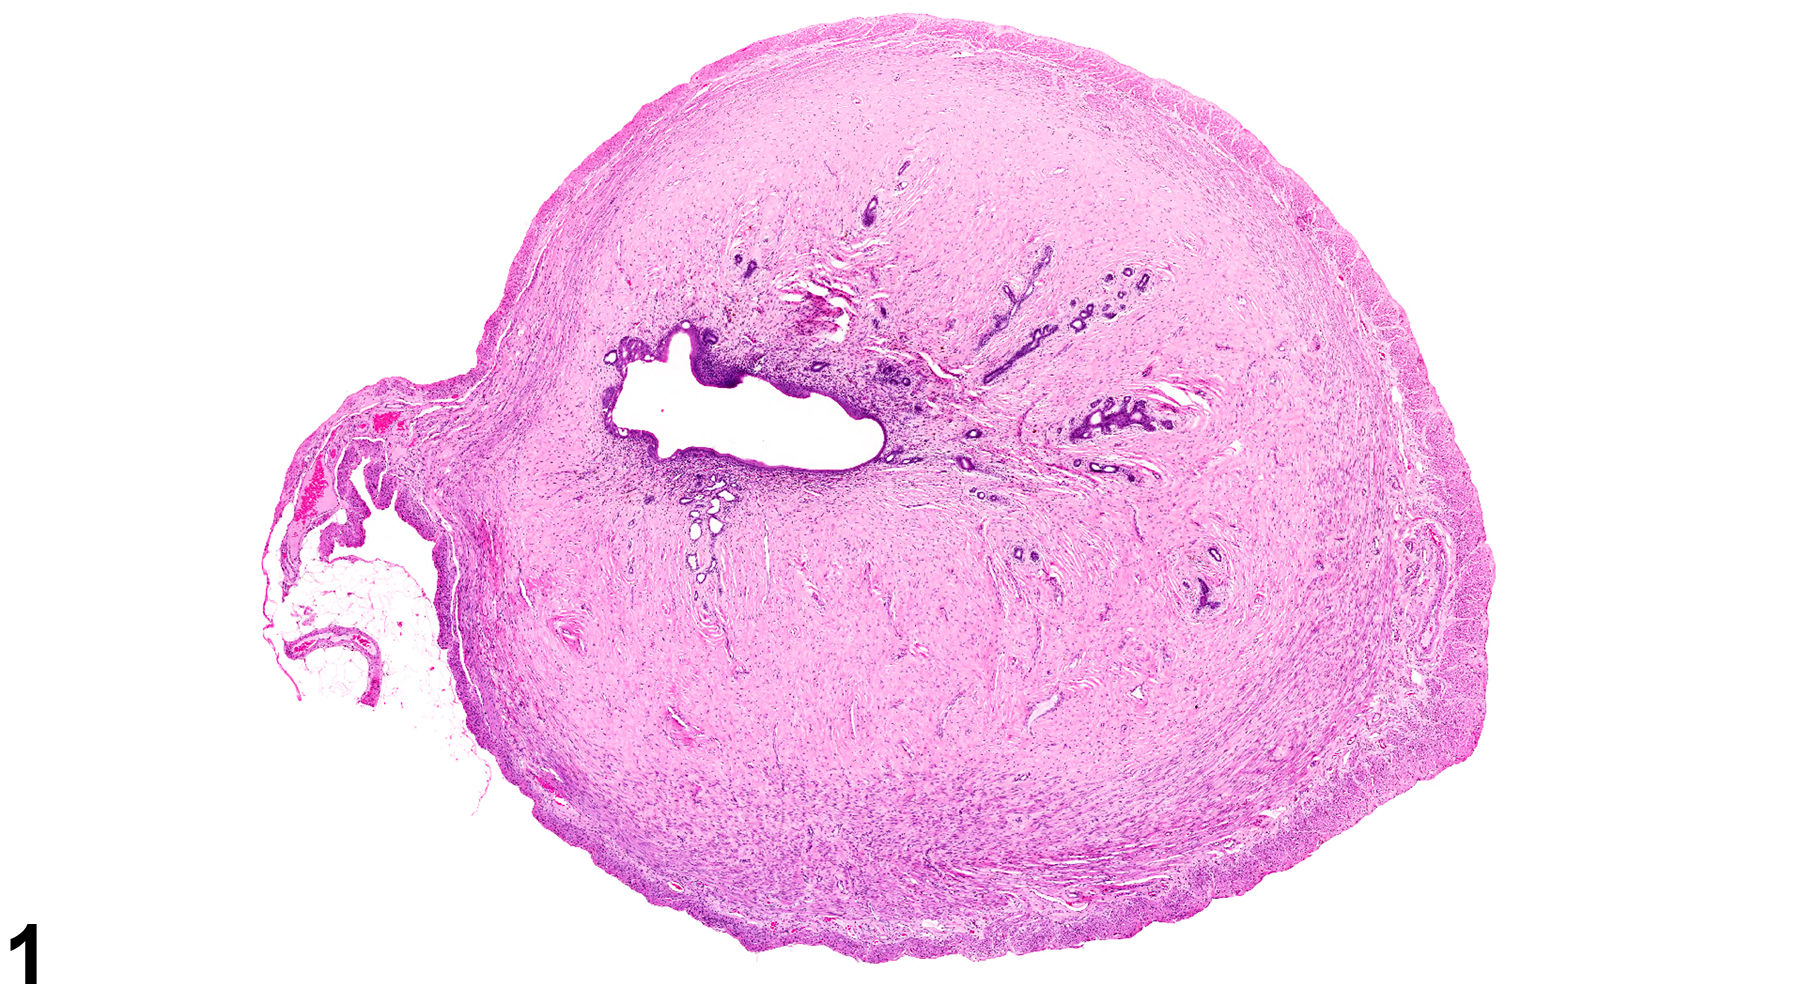 Image of fibrosis in the uterus from a female F344/N rat in a chronic study